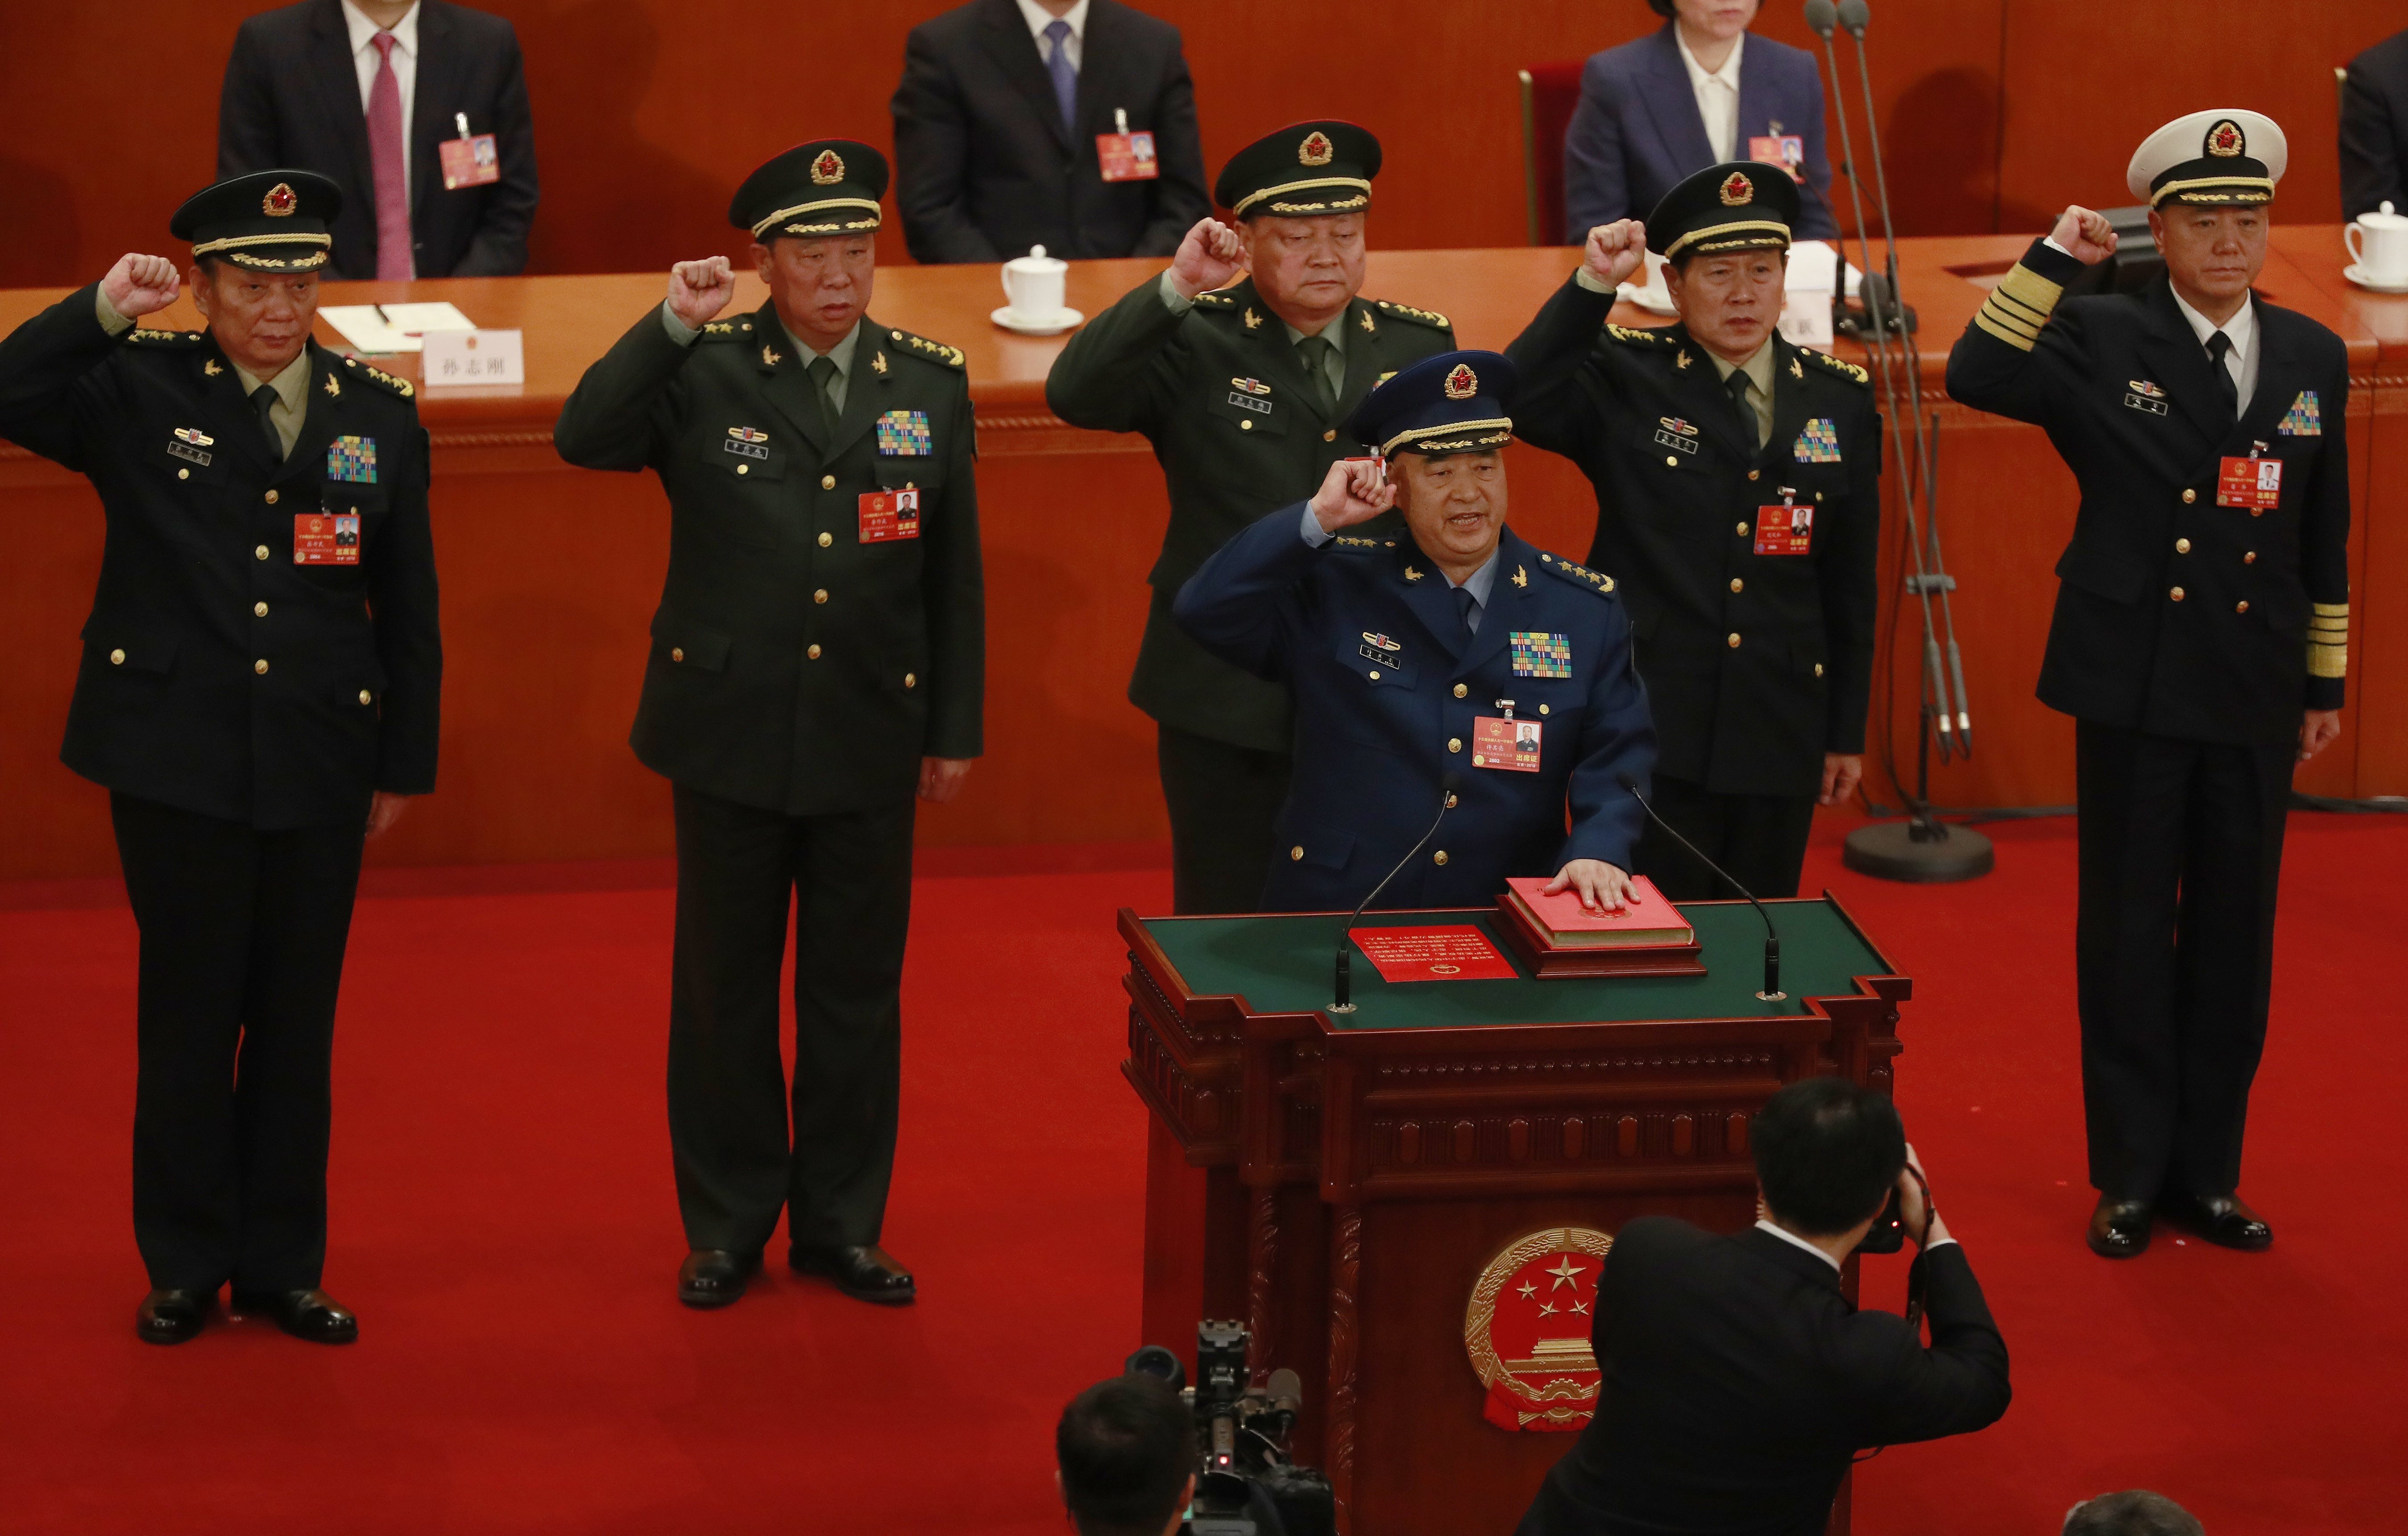 Newly appointed vice-chairman of the Central Military Commission Xu Qiliang (at podium) leads the military oath-taking ceremony at the National People’s Congress in Beijing on Sunday. Also pictured are CMC vice-chairman Zhang Youxia (back row, centre) and regular members (from left) Zhang Shengmin, Li Zuocheng, Wei Fenghe and Miao Hua. Photo: EPA-EFE